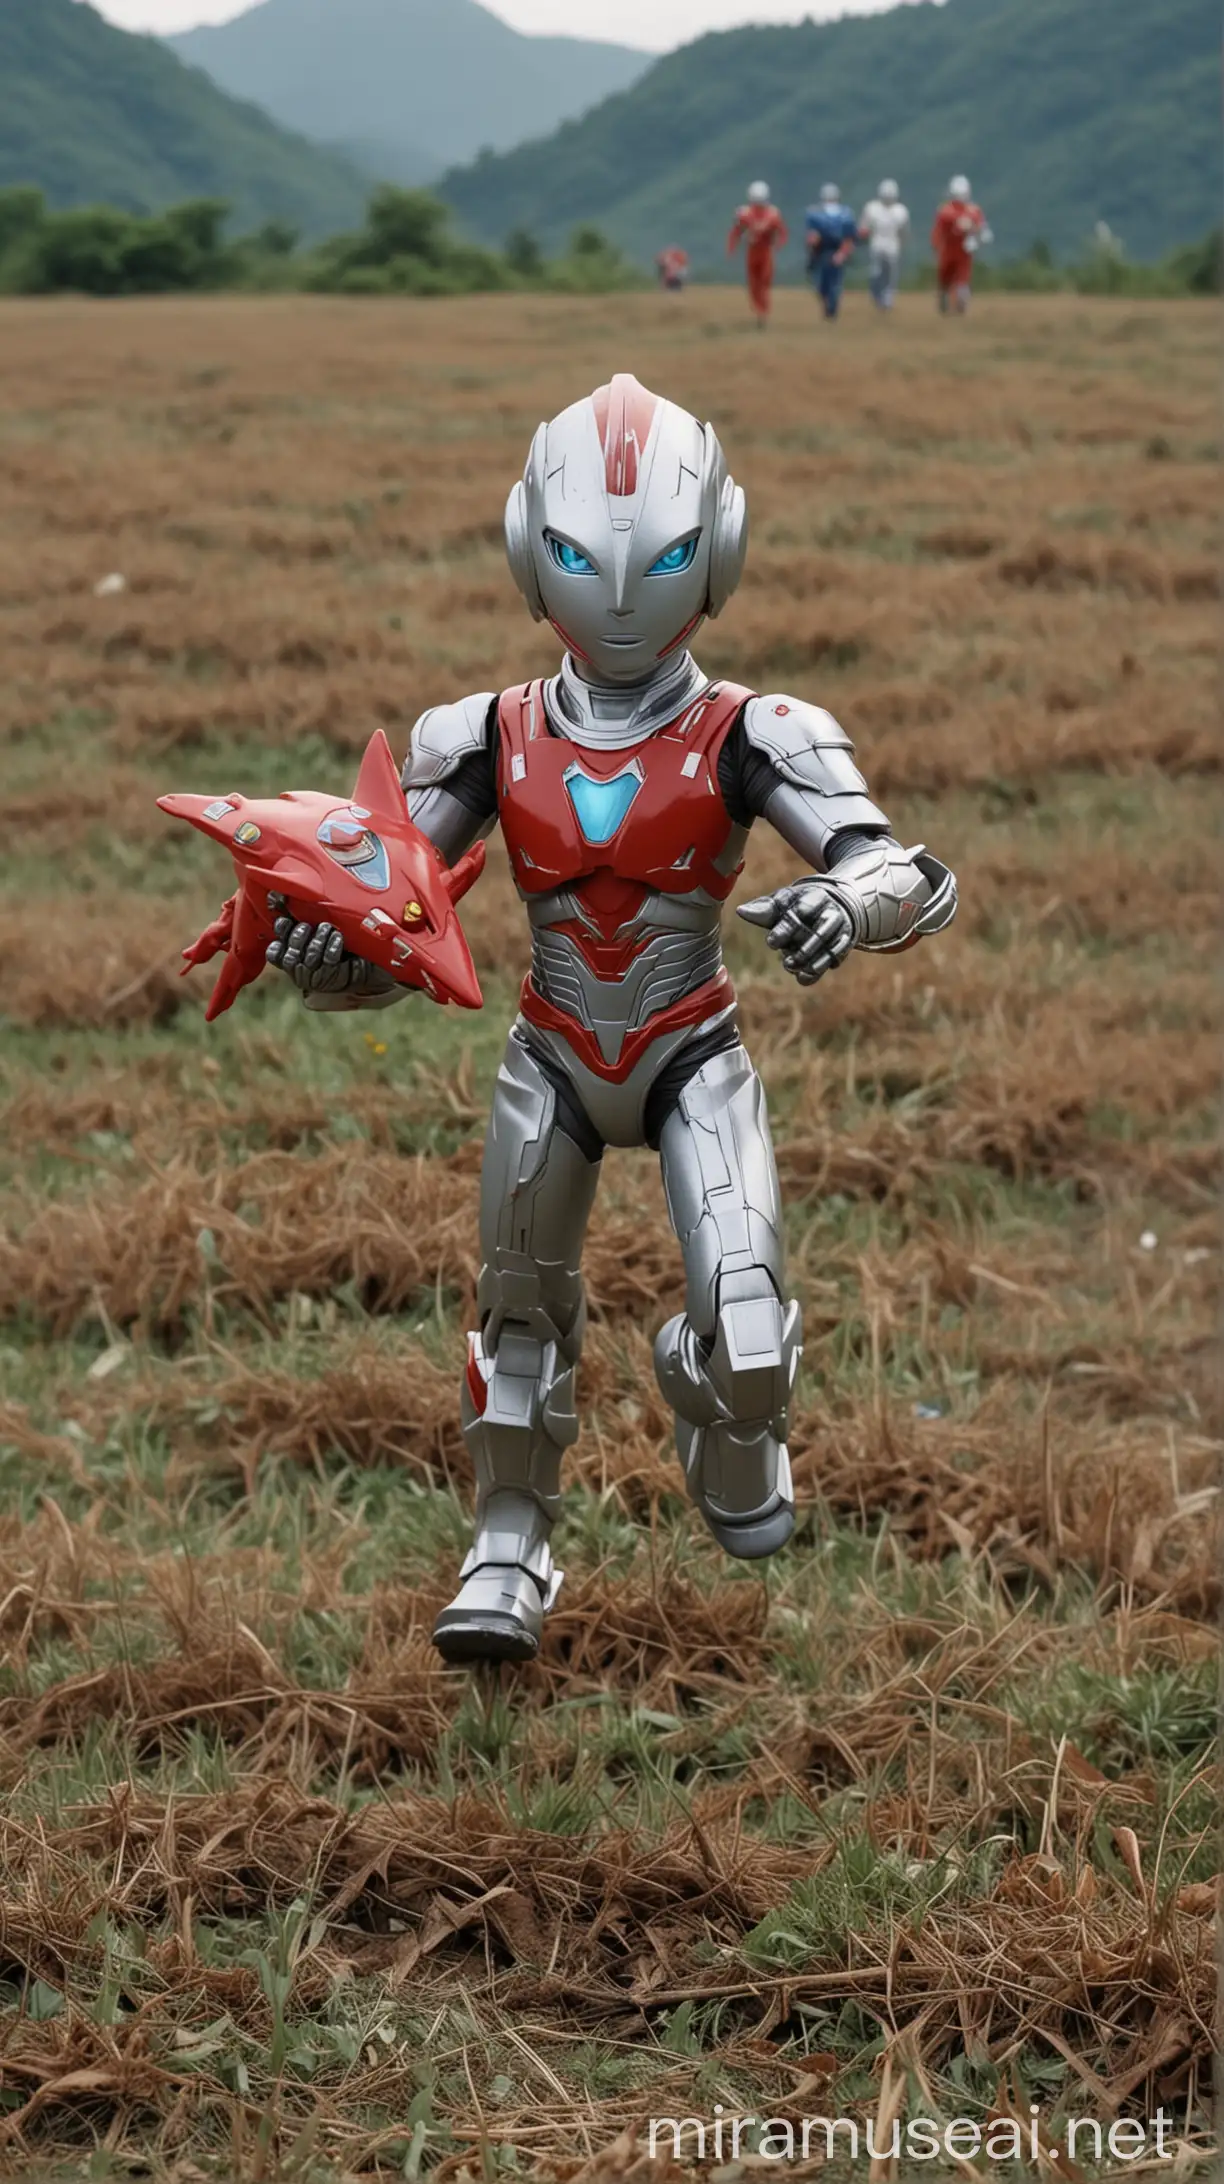 The little boy holds an Ultraman toy in his hand, running in the field, the film crew recruits for posters.